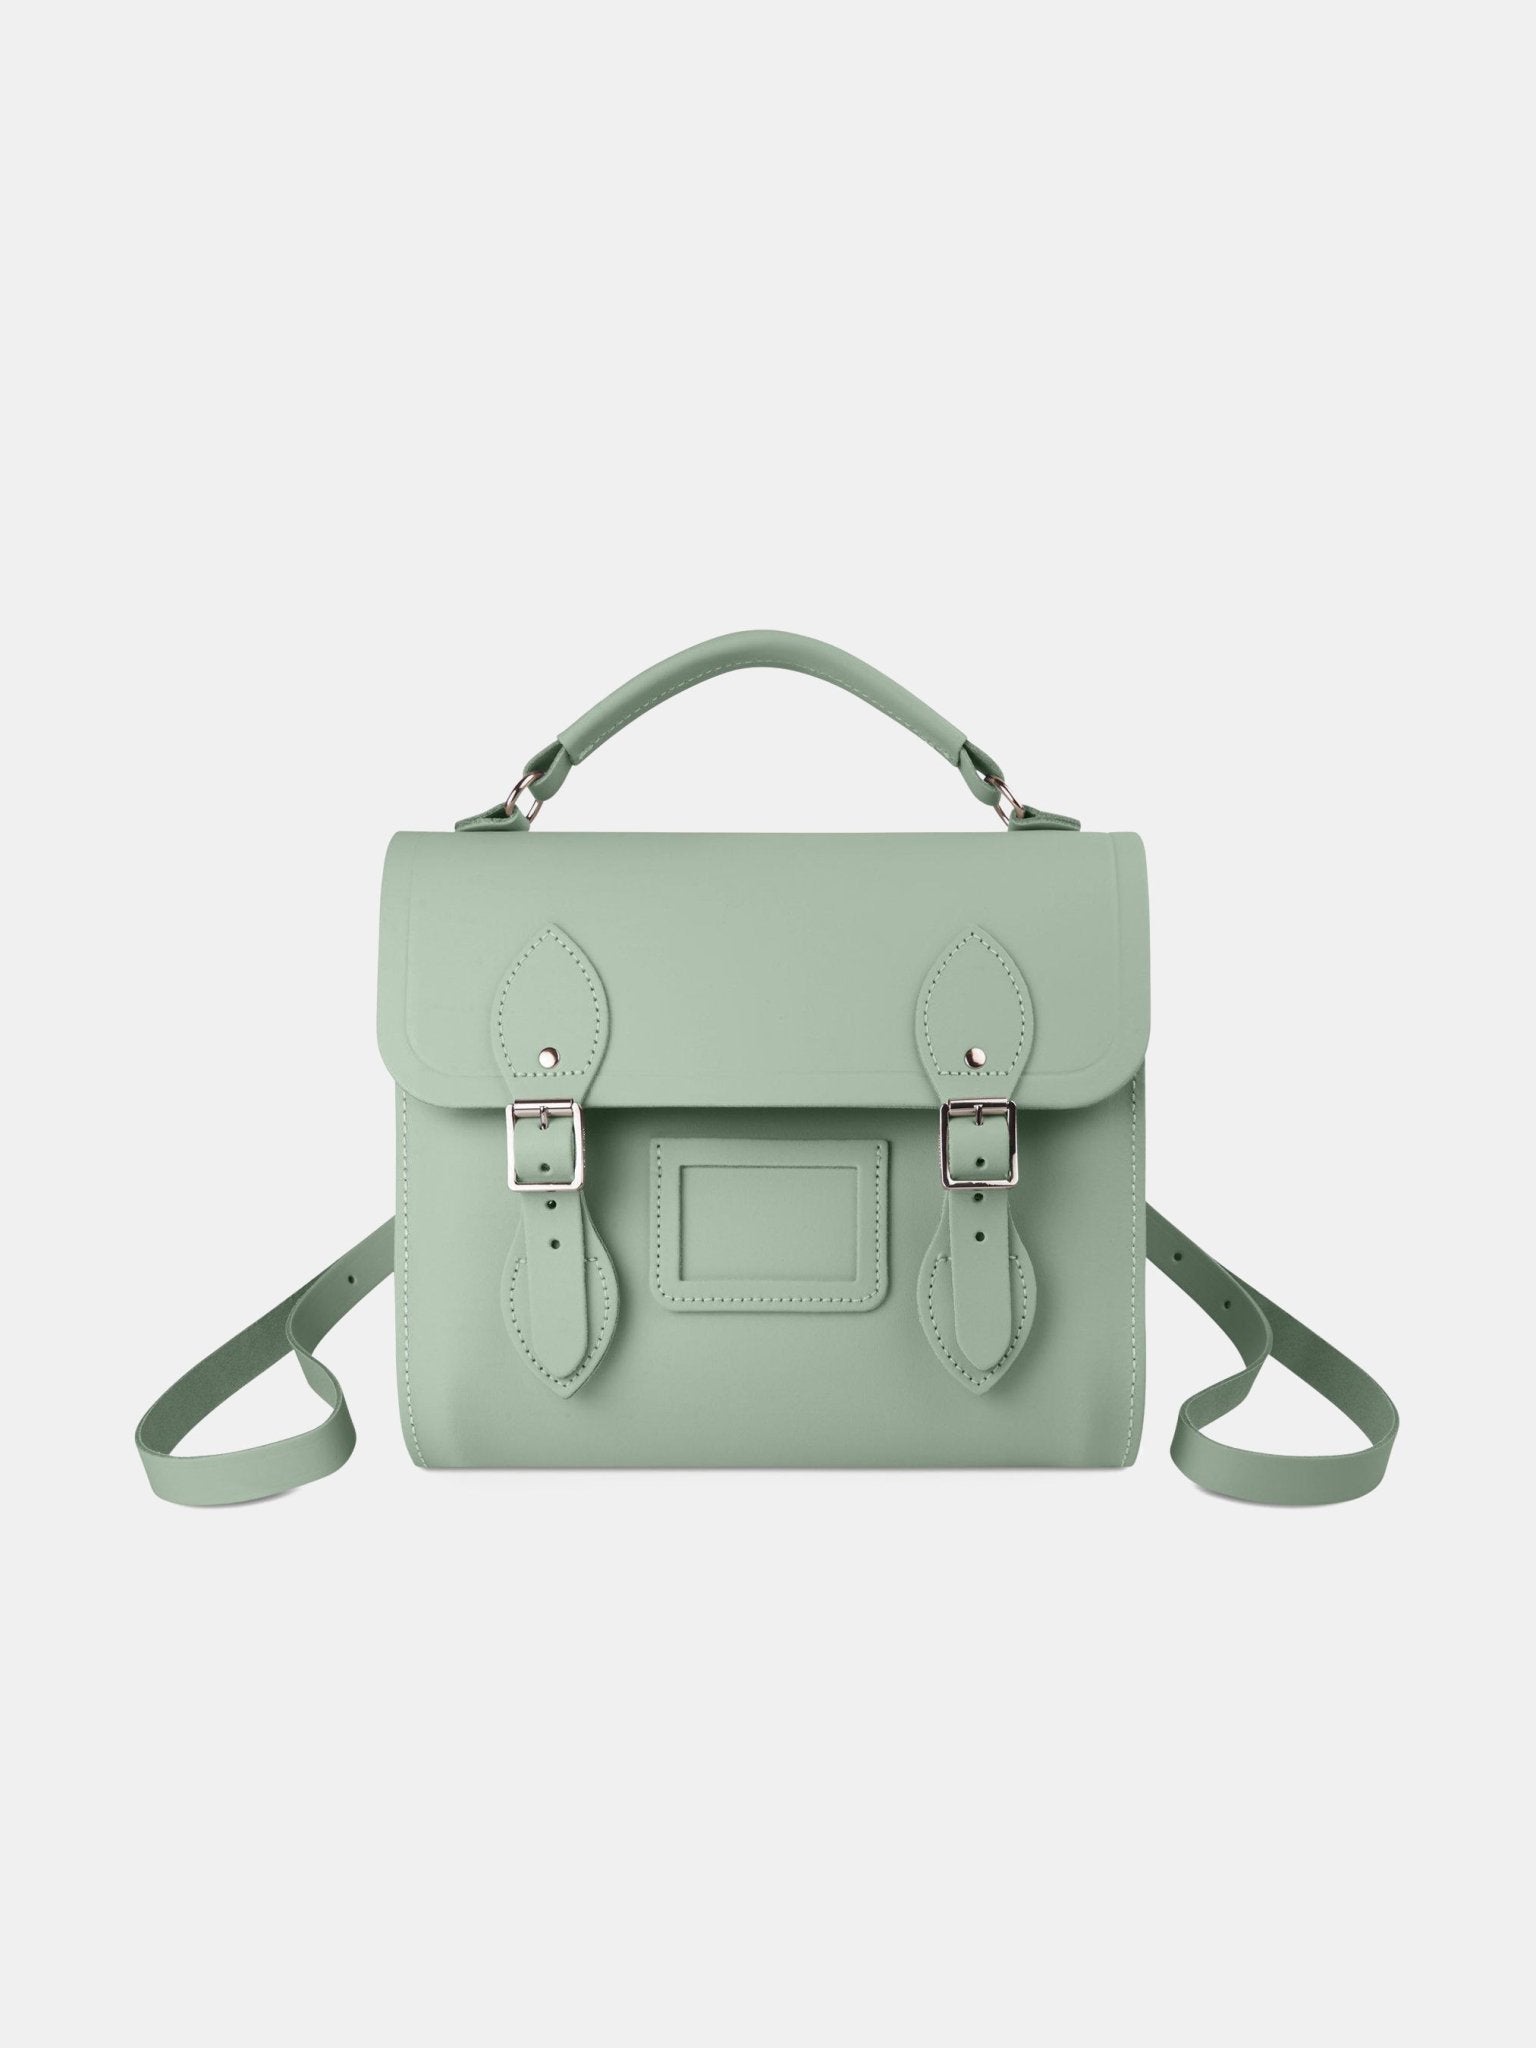 Barrel Backpack in Leather - Sabi Green - The Cambridge Satchel Company UK Store